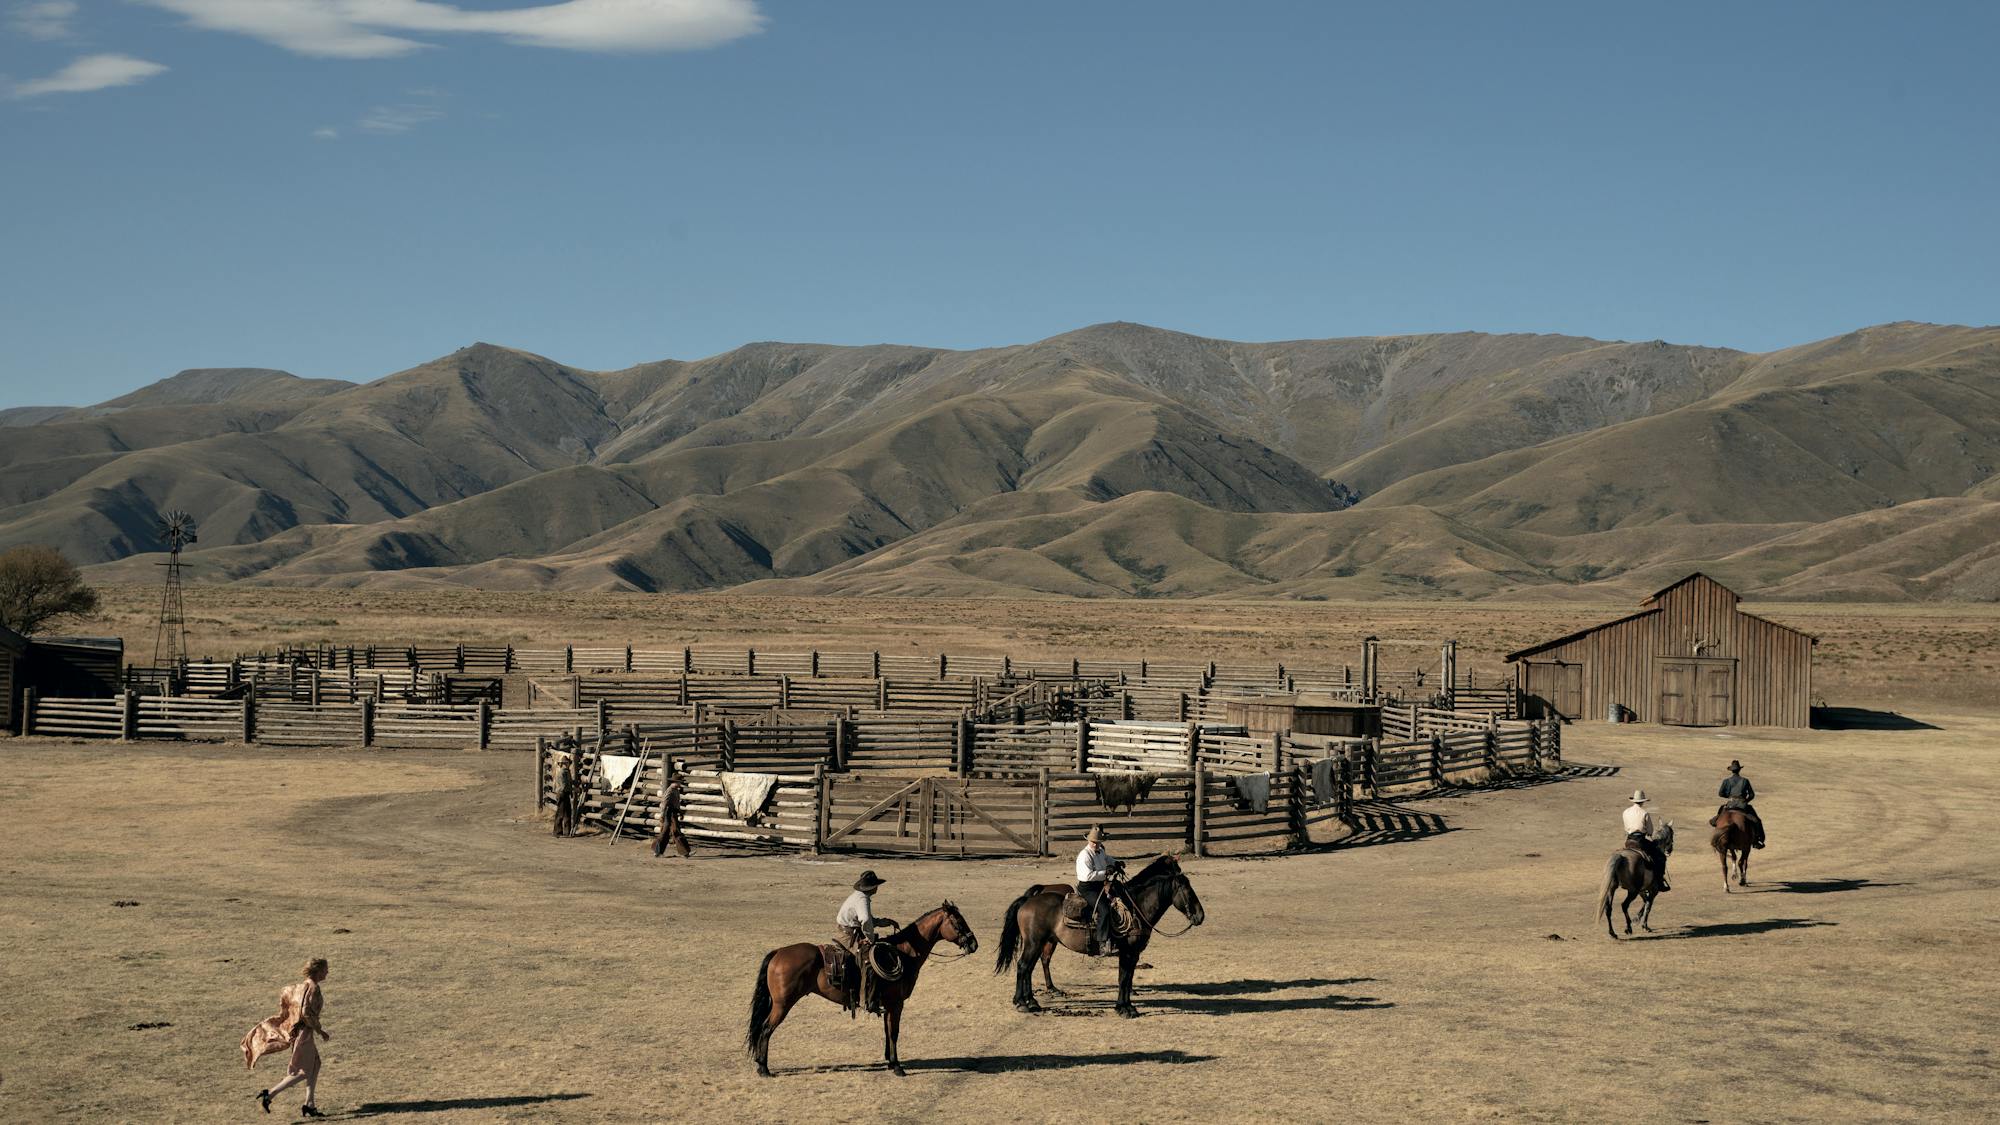 Kirsten Dunst, Kodi Smit-McPhee, Benedict Cumberbatch, and The Power of the Dog cast members ride horses. Kirsten trails behind on her feet. The sky is bright blue, the mountains are shadowed, and there are fences in circular shapes at the enter of the image.